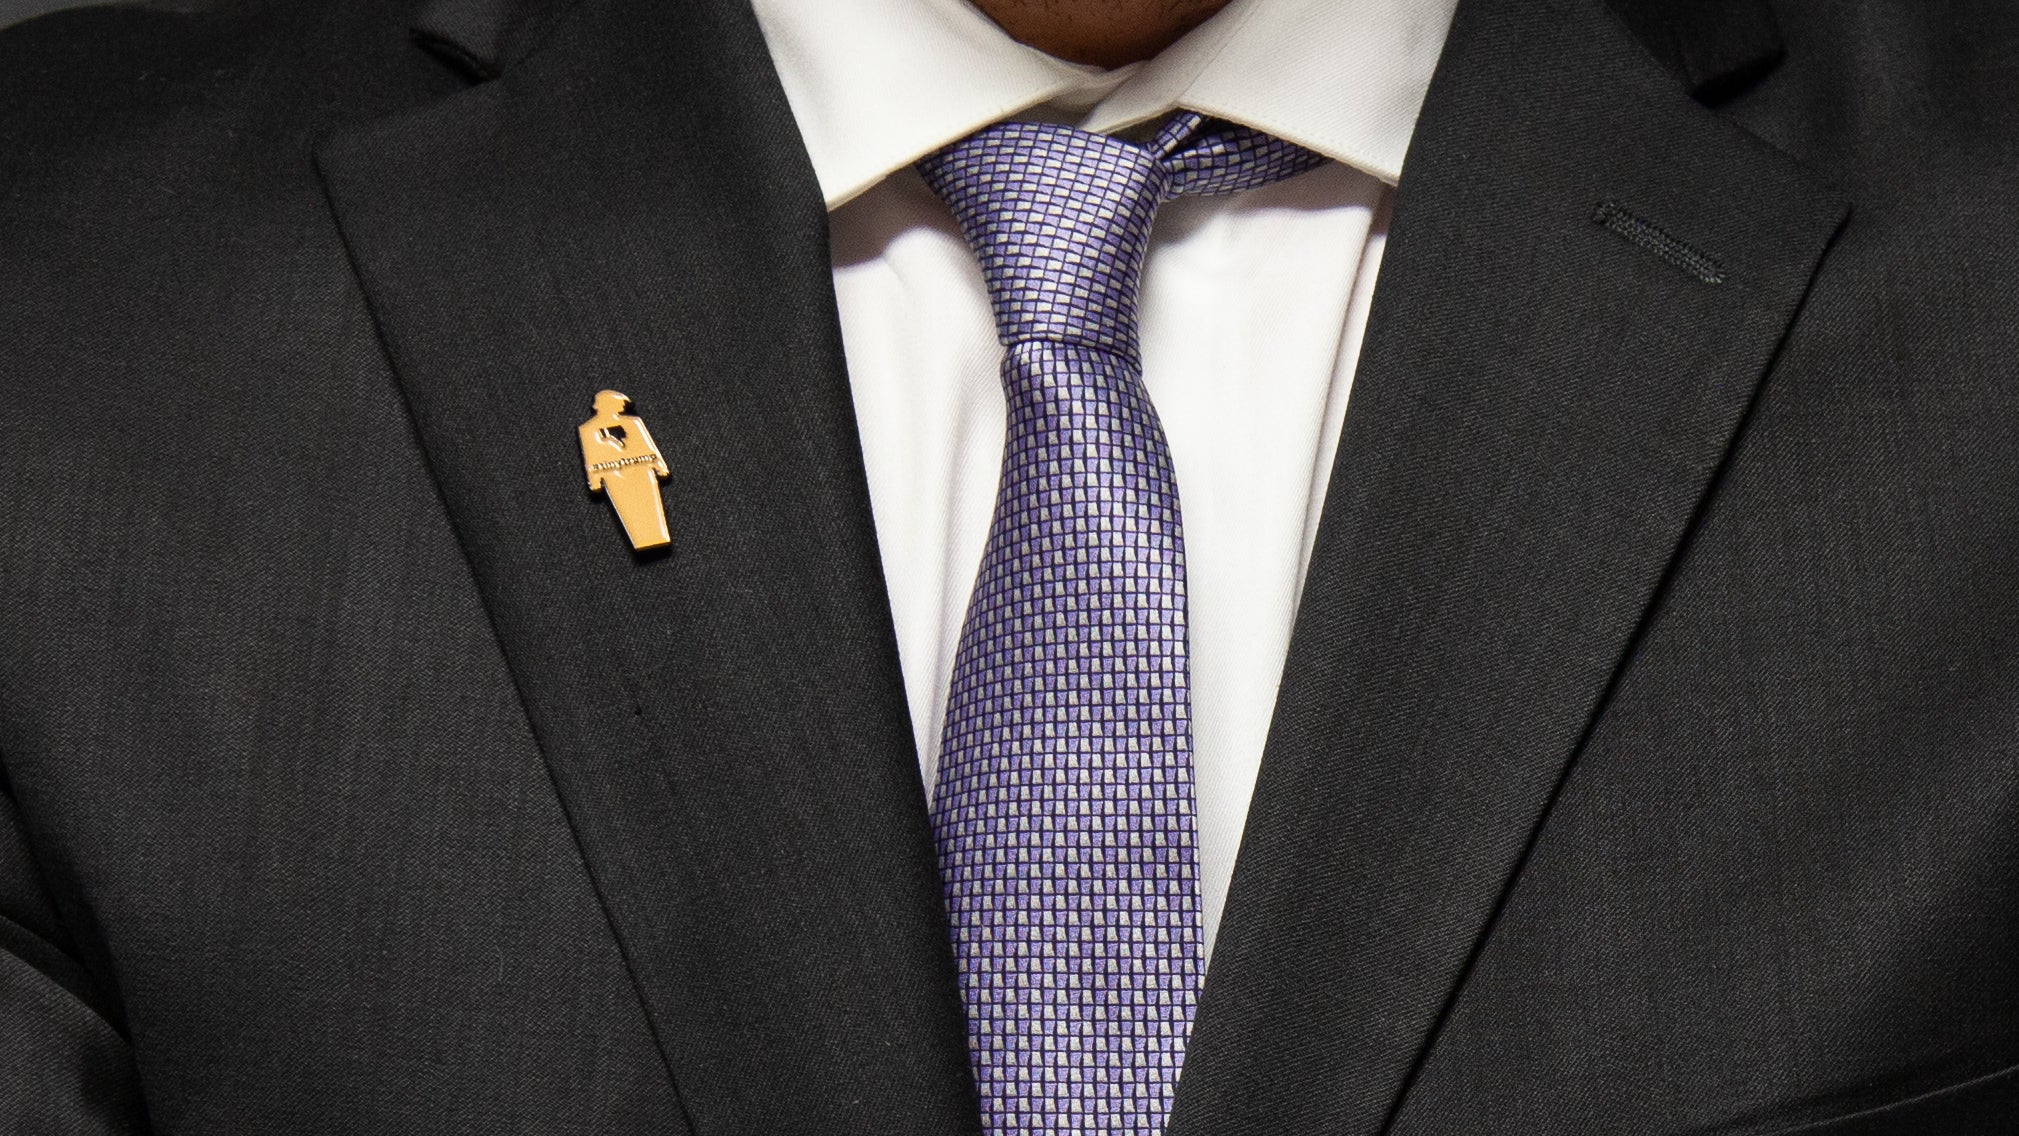 Closeup of a 1.5" tall tiny trump enamel pin on a men's suit lapel. tiny trump has a thumbs down sign in the middle of its chest